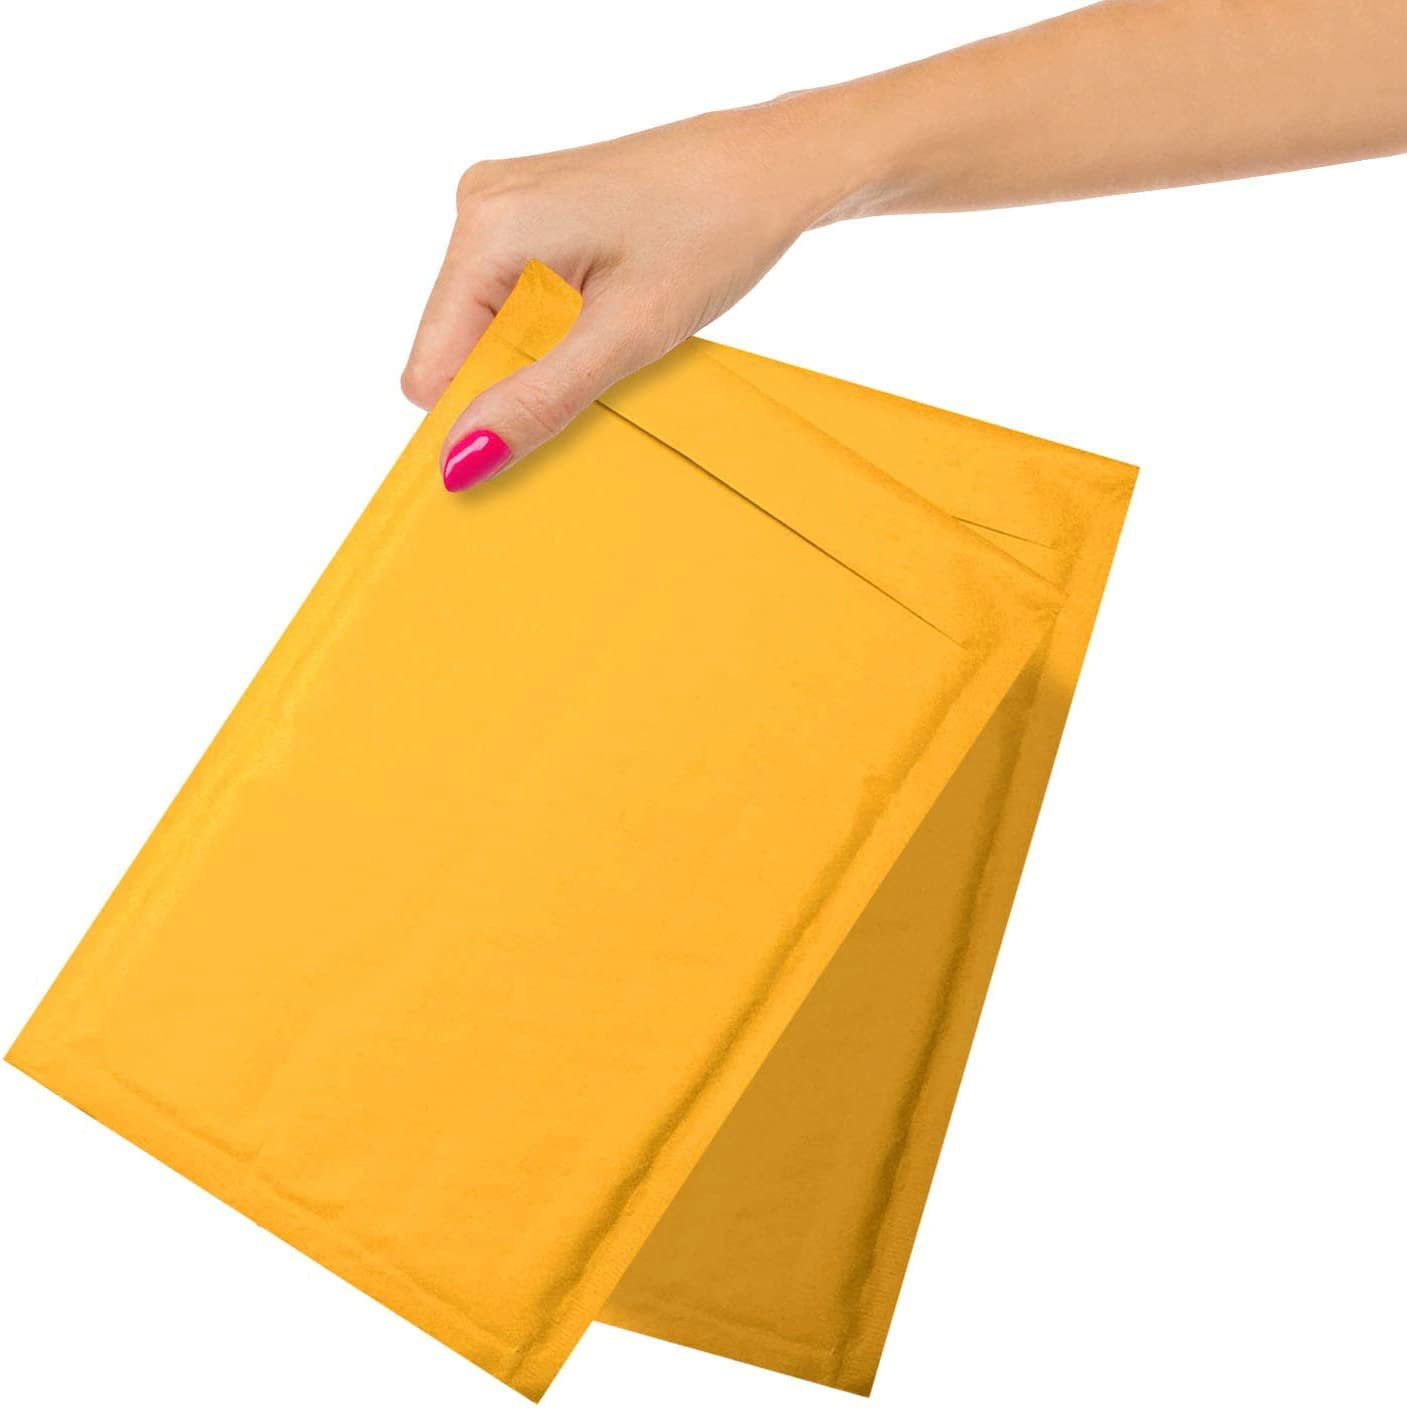 50 pcs #3 8 1/2"x14 1/2" Kraft Bubble Mailers Padded Envelope Shipping Bags 